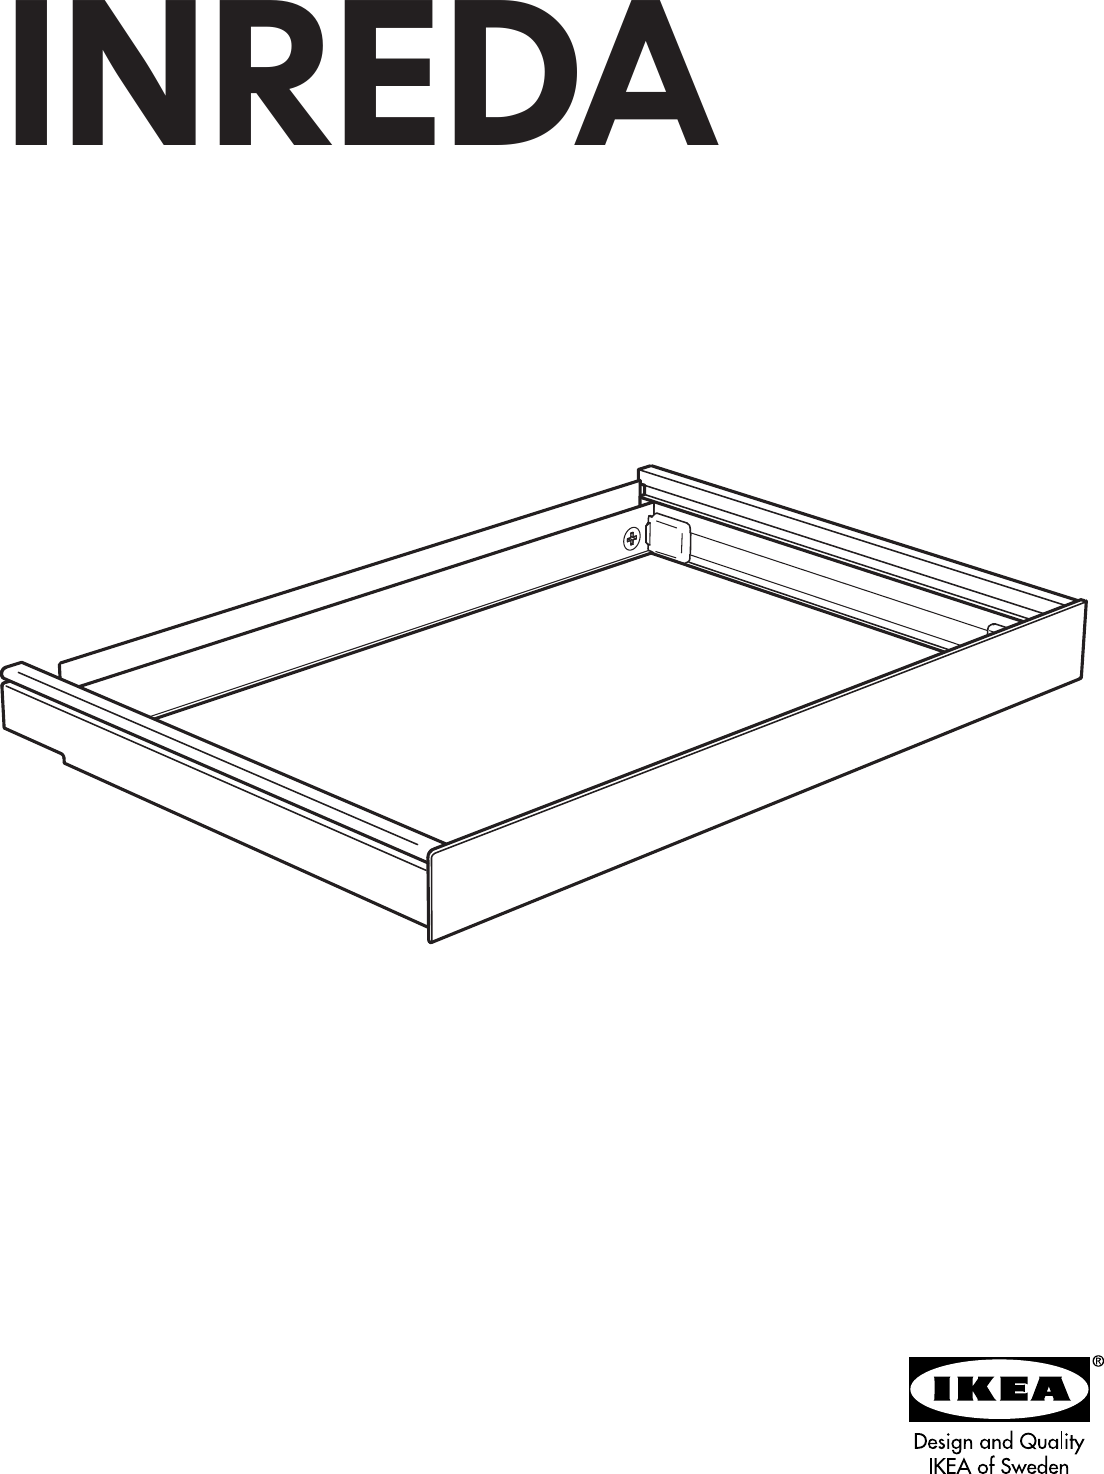 Page 1 of 12 - Ikea Ikea-Inreda-Pull-Out-Frame-Assembly-Instruction